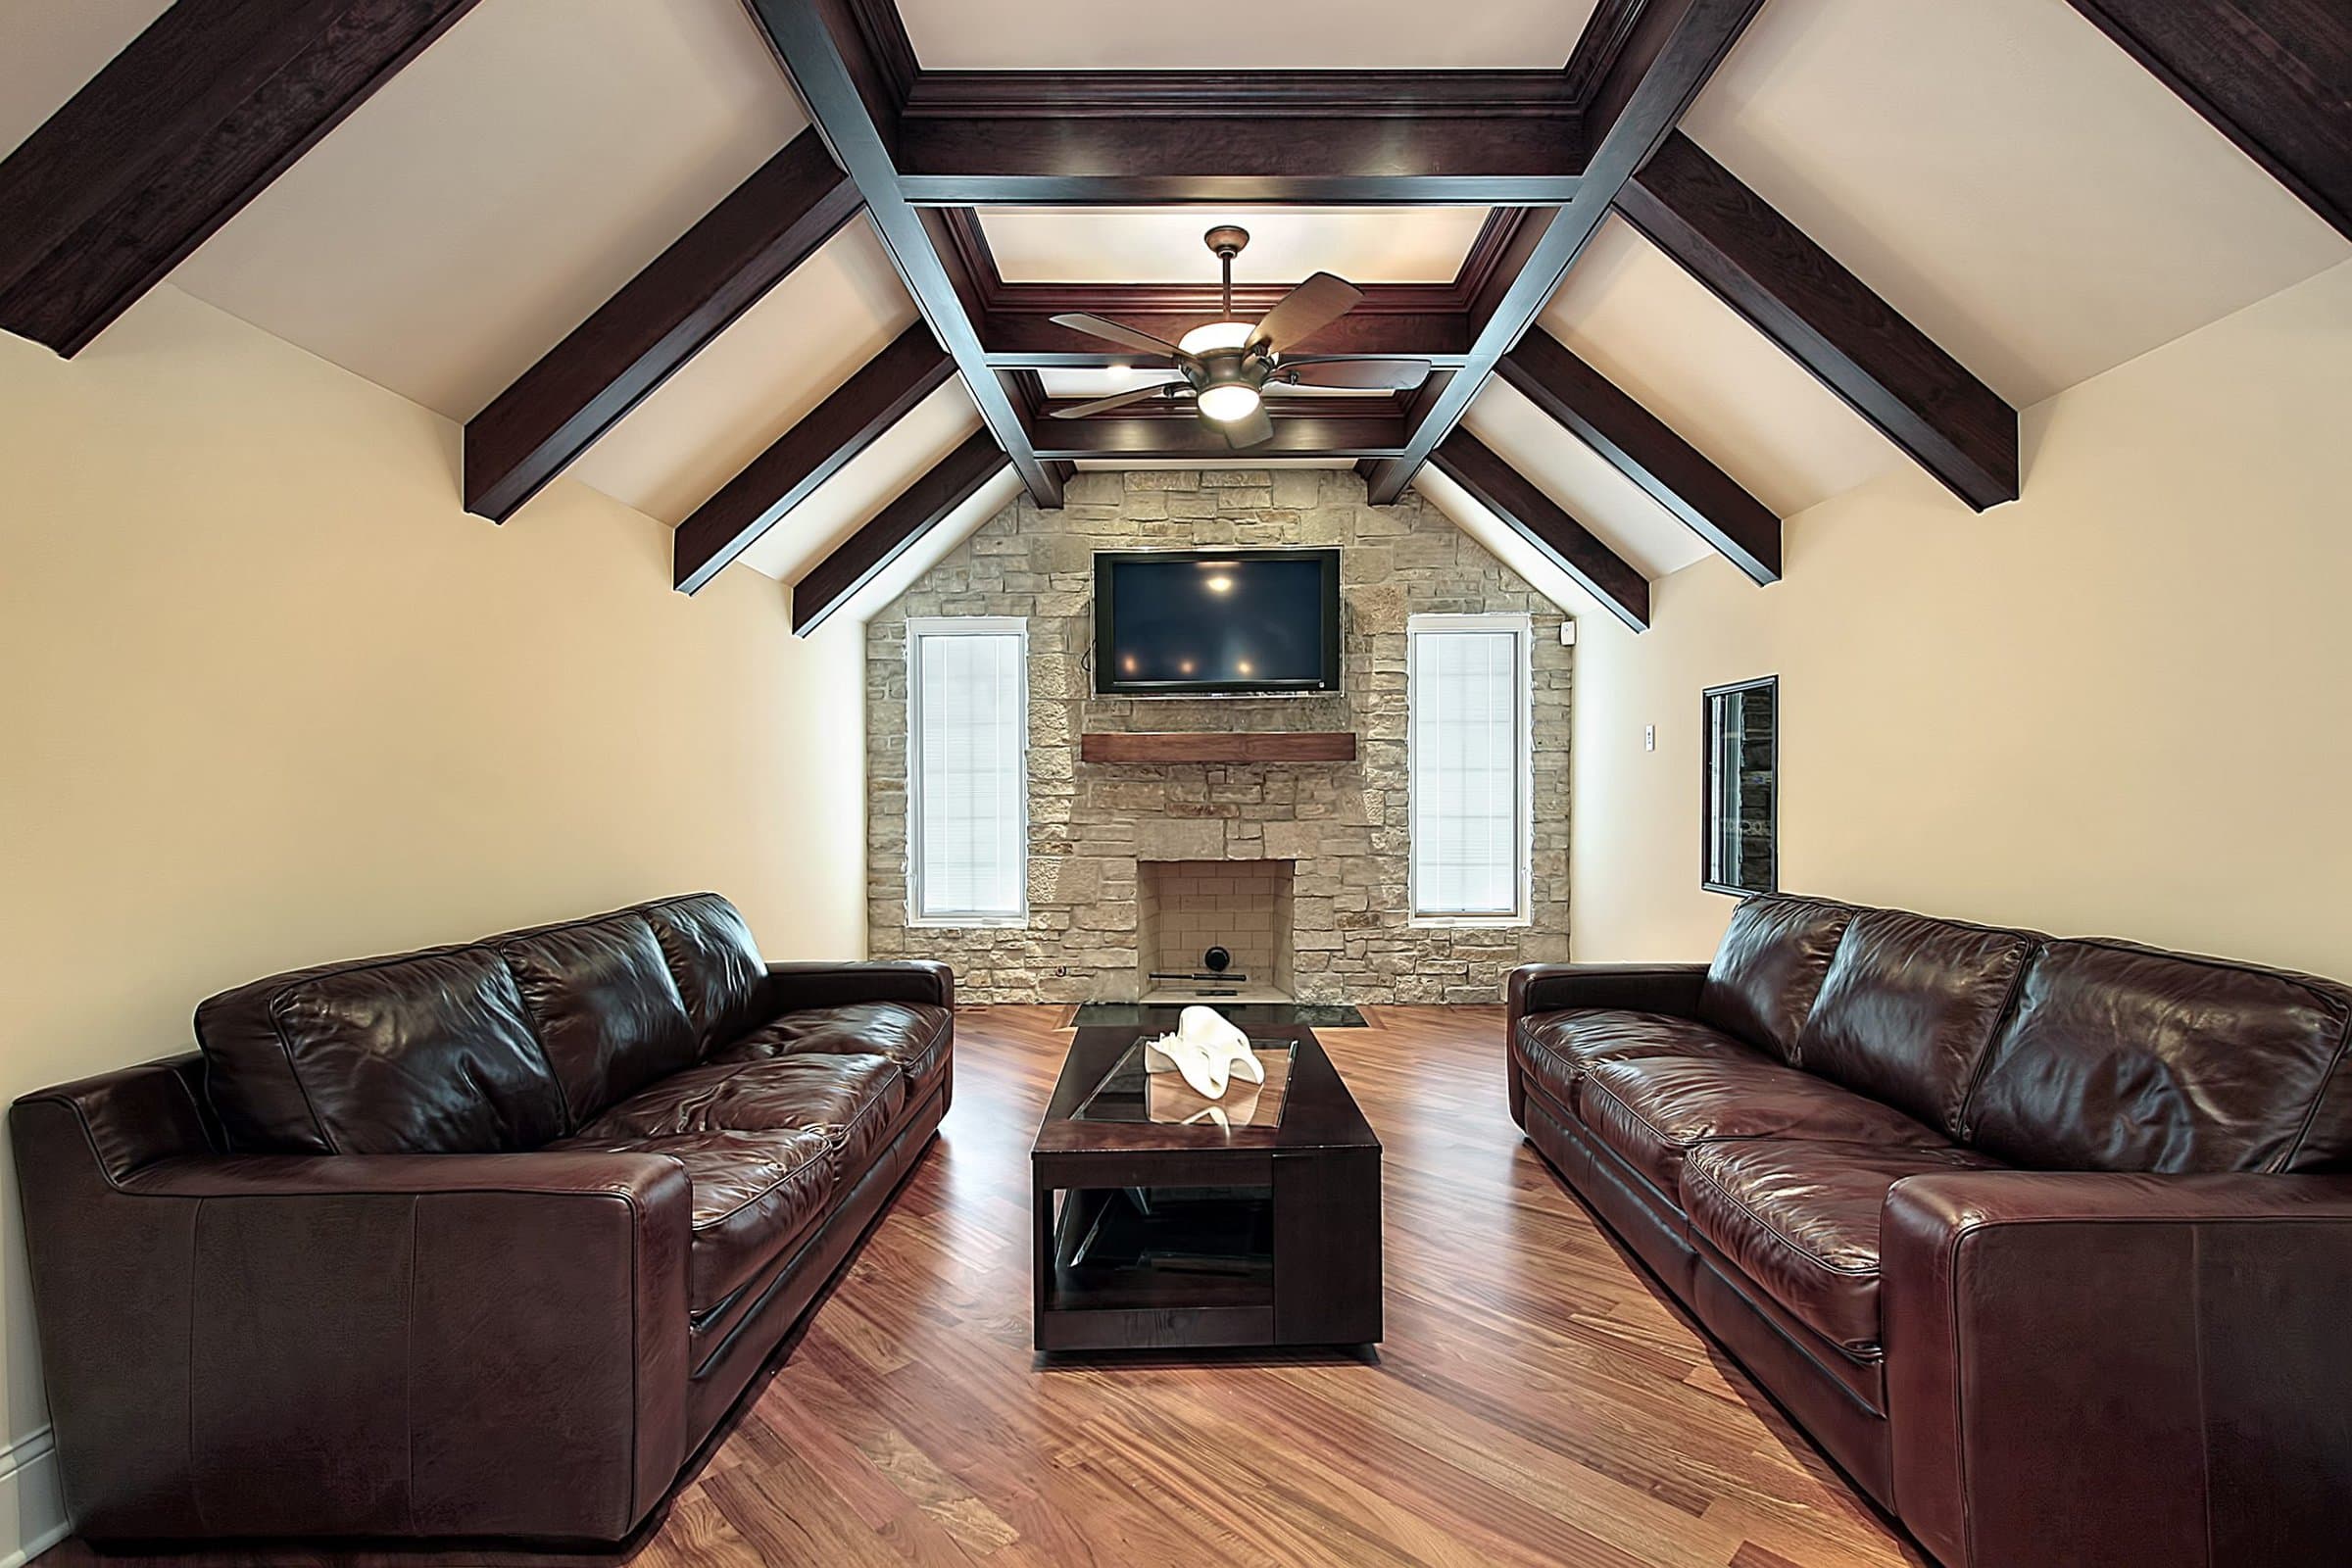  Chocolate Brown Ceiling Beams Look Quite Serious scaled